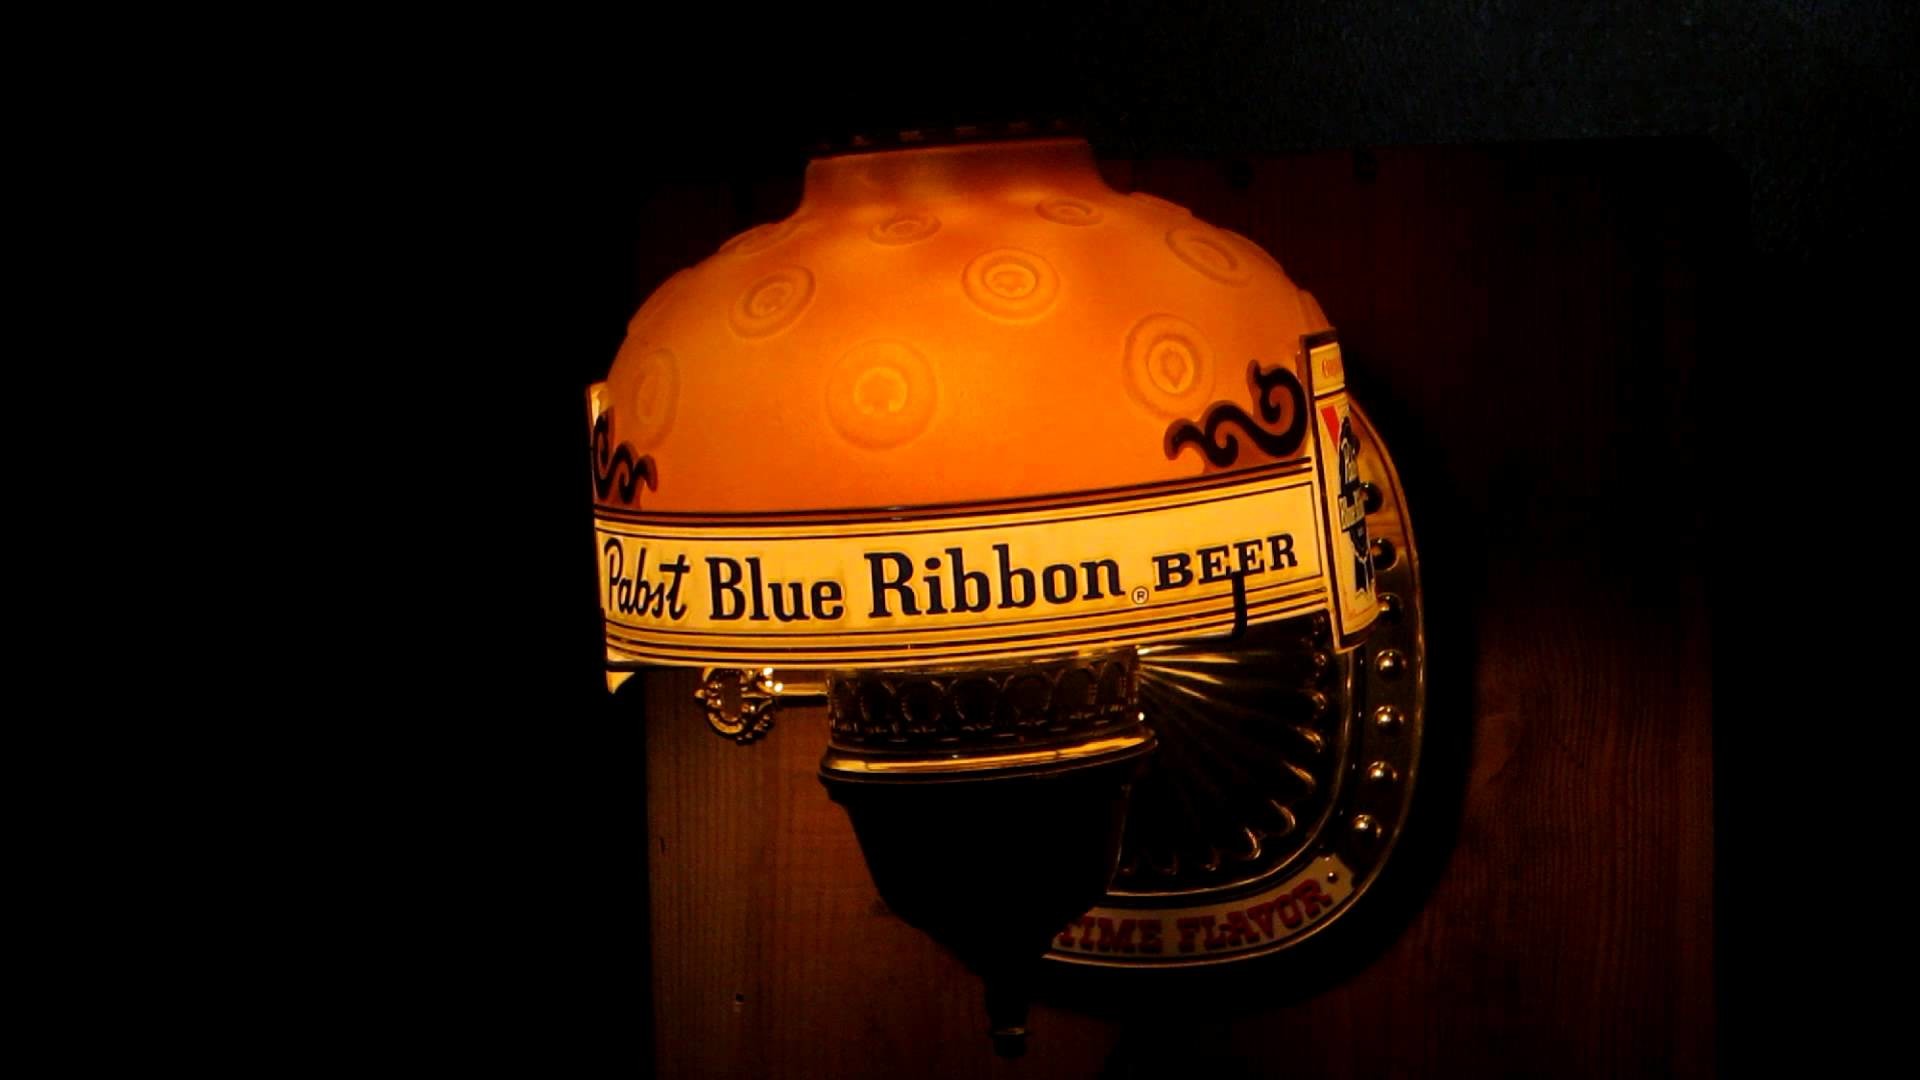 1920x1080 Vintage 1968 Pabst Blue Ribbon Old Time Flavor Beer Light Up Rotating  Motion Sign Wall Sconce Lamp